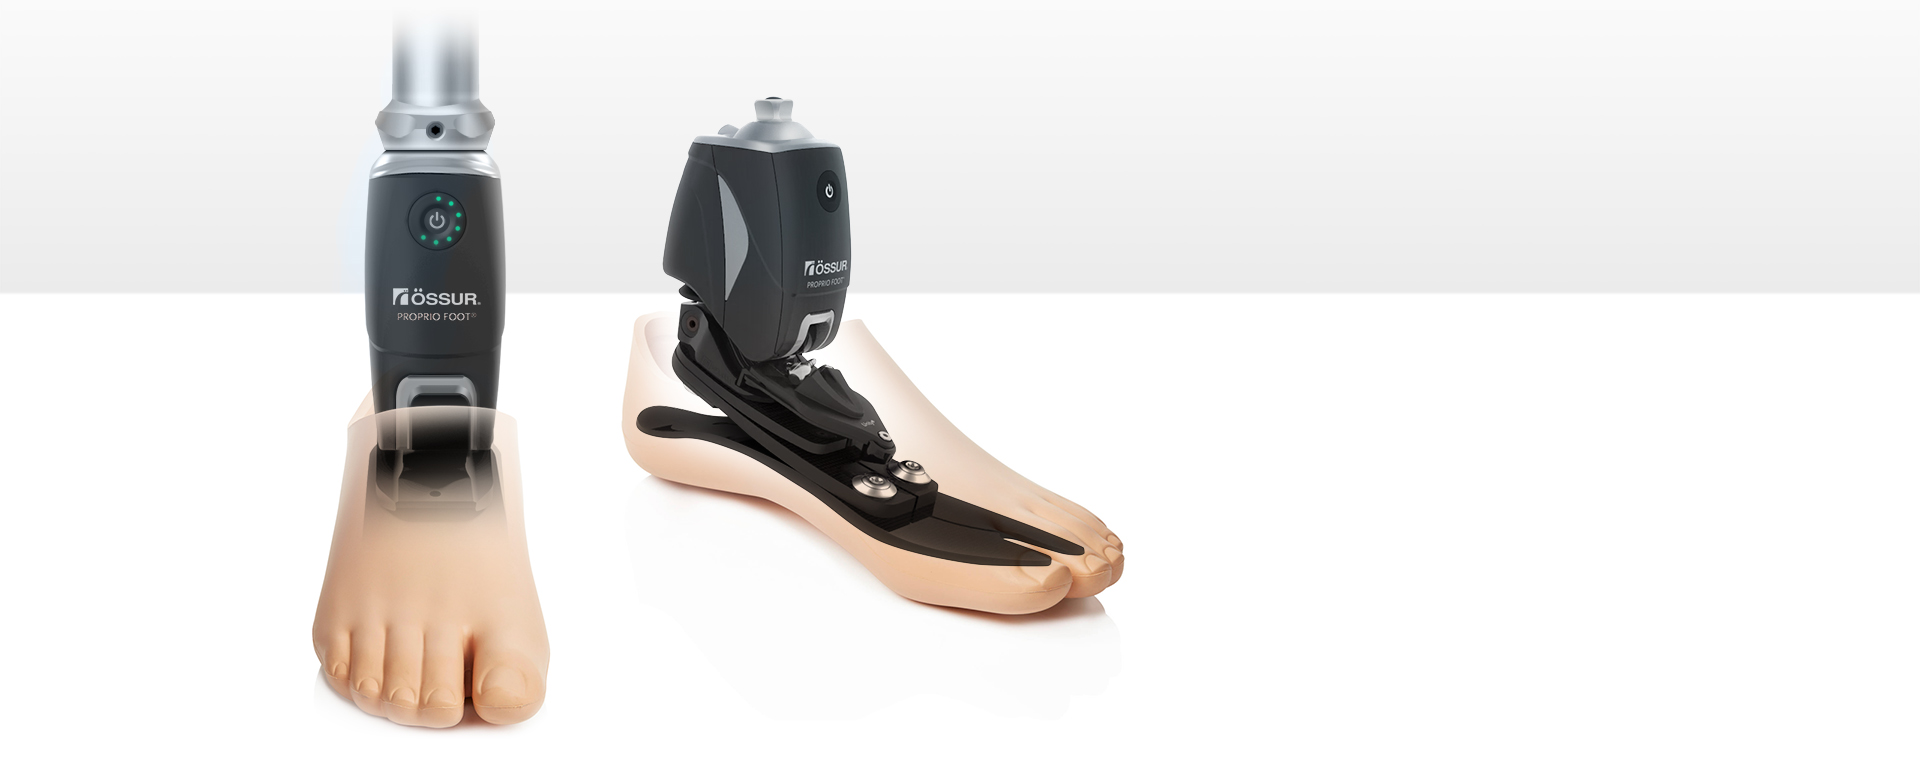 WAACS Össur Bionic Ankle Proprio Foot overview